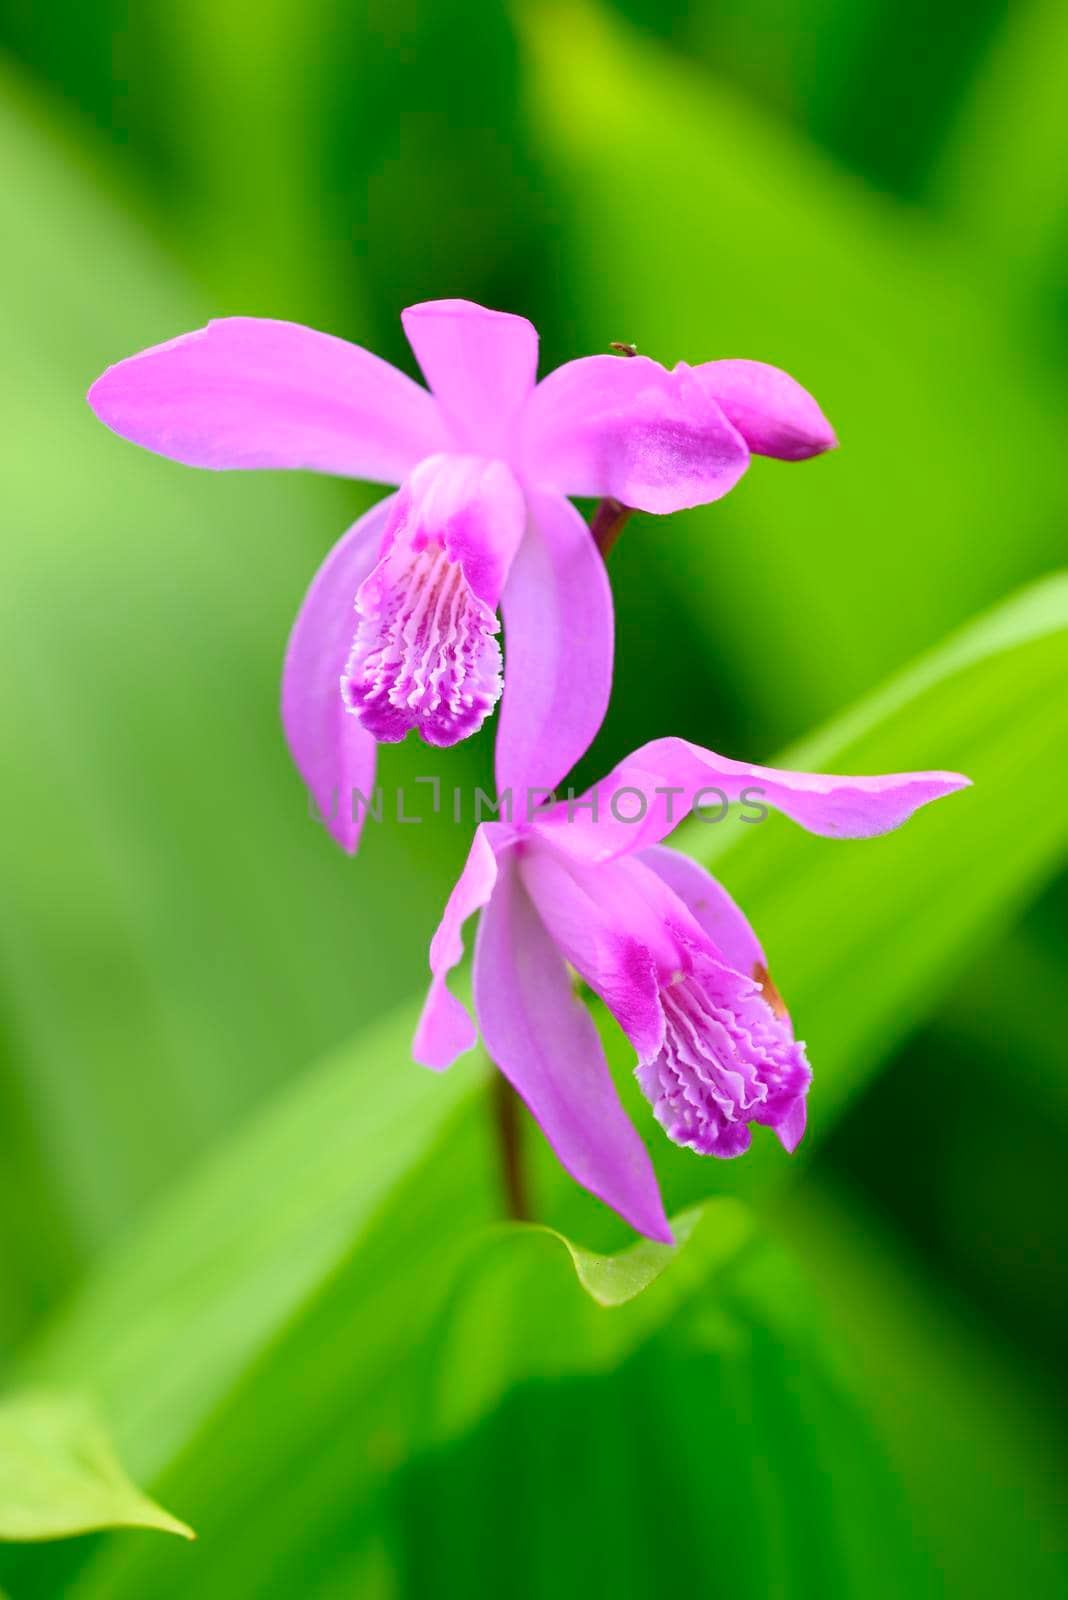 Flowers of China purple orchid, Bletilla striata, on green background.